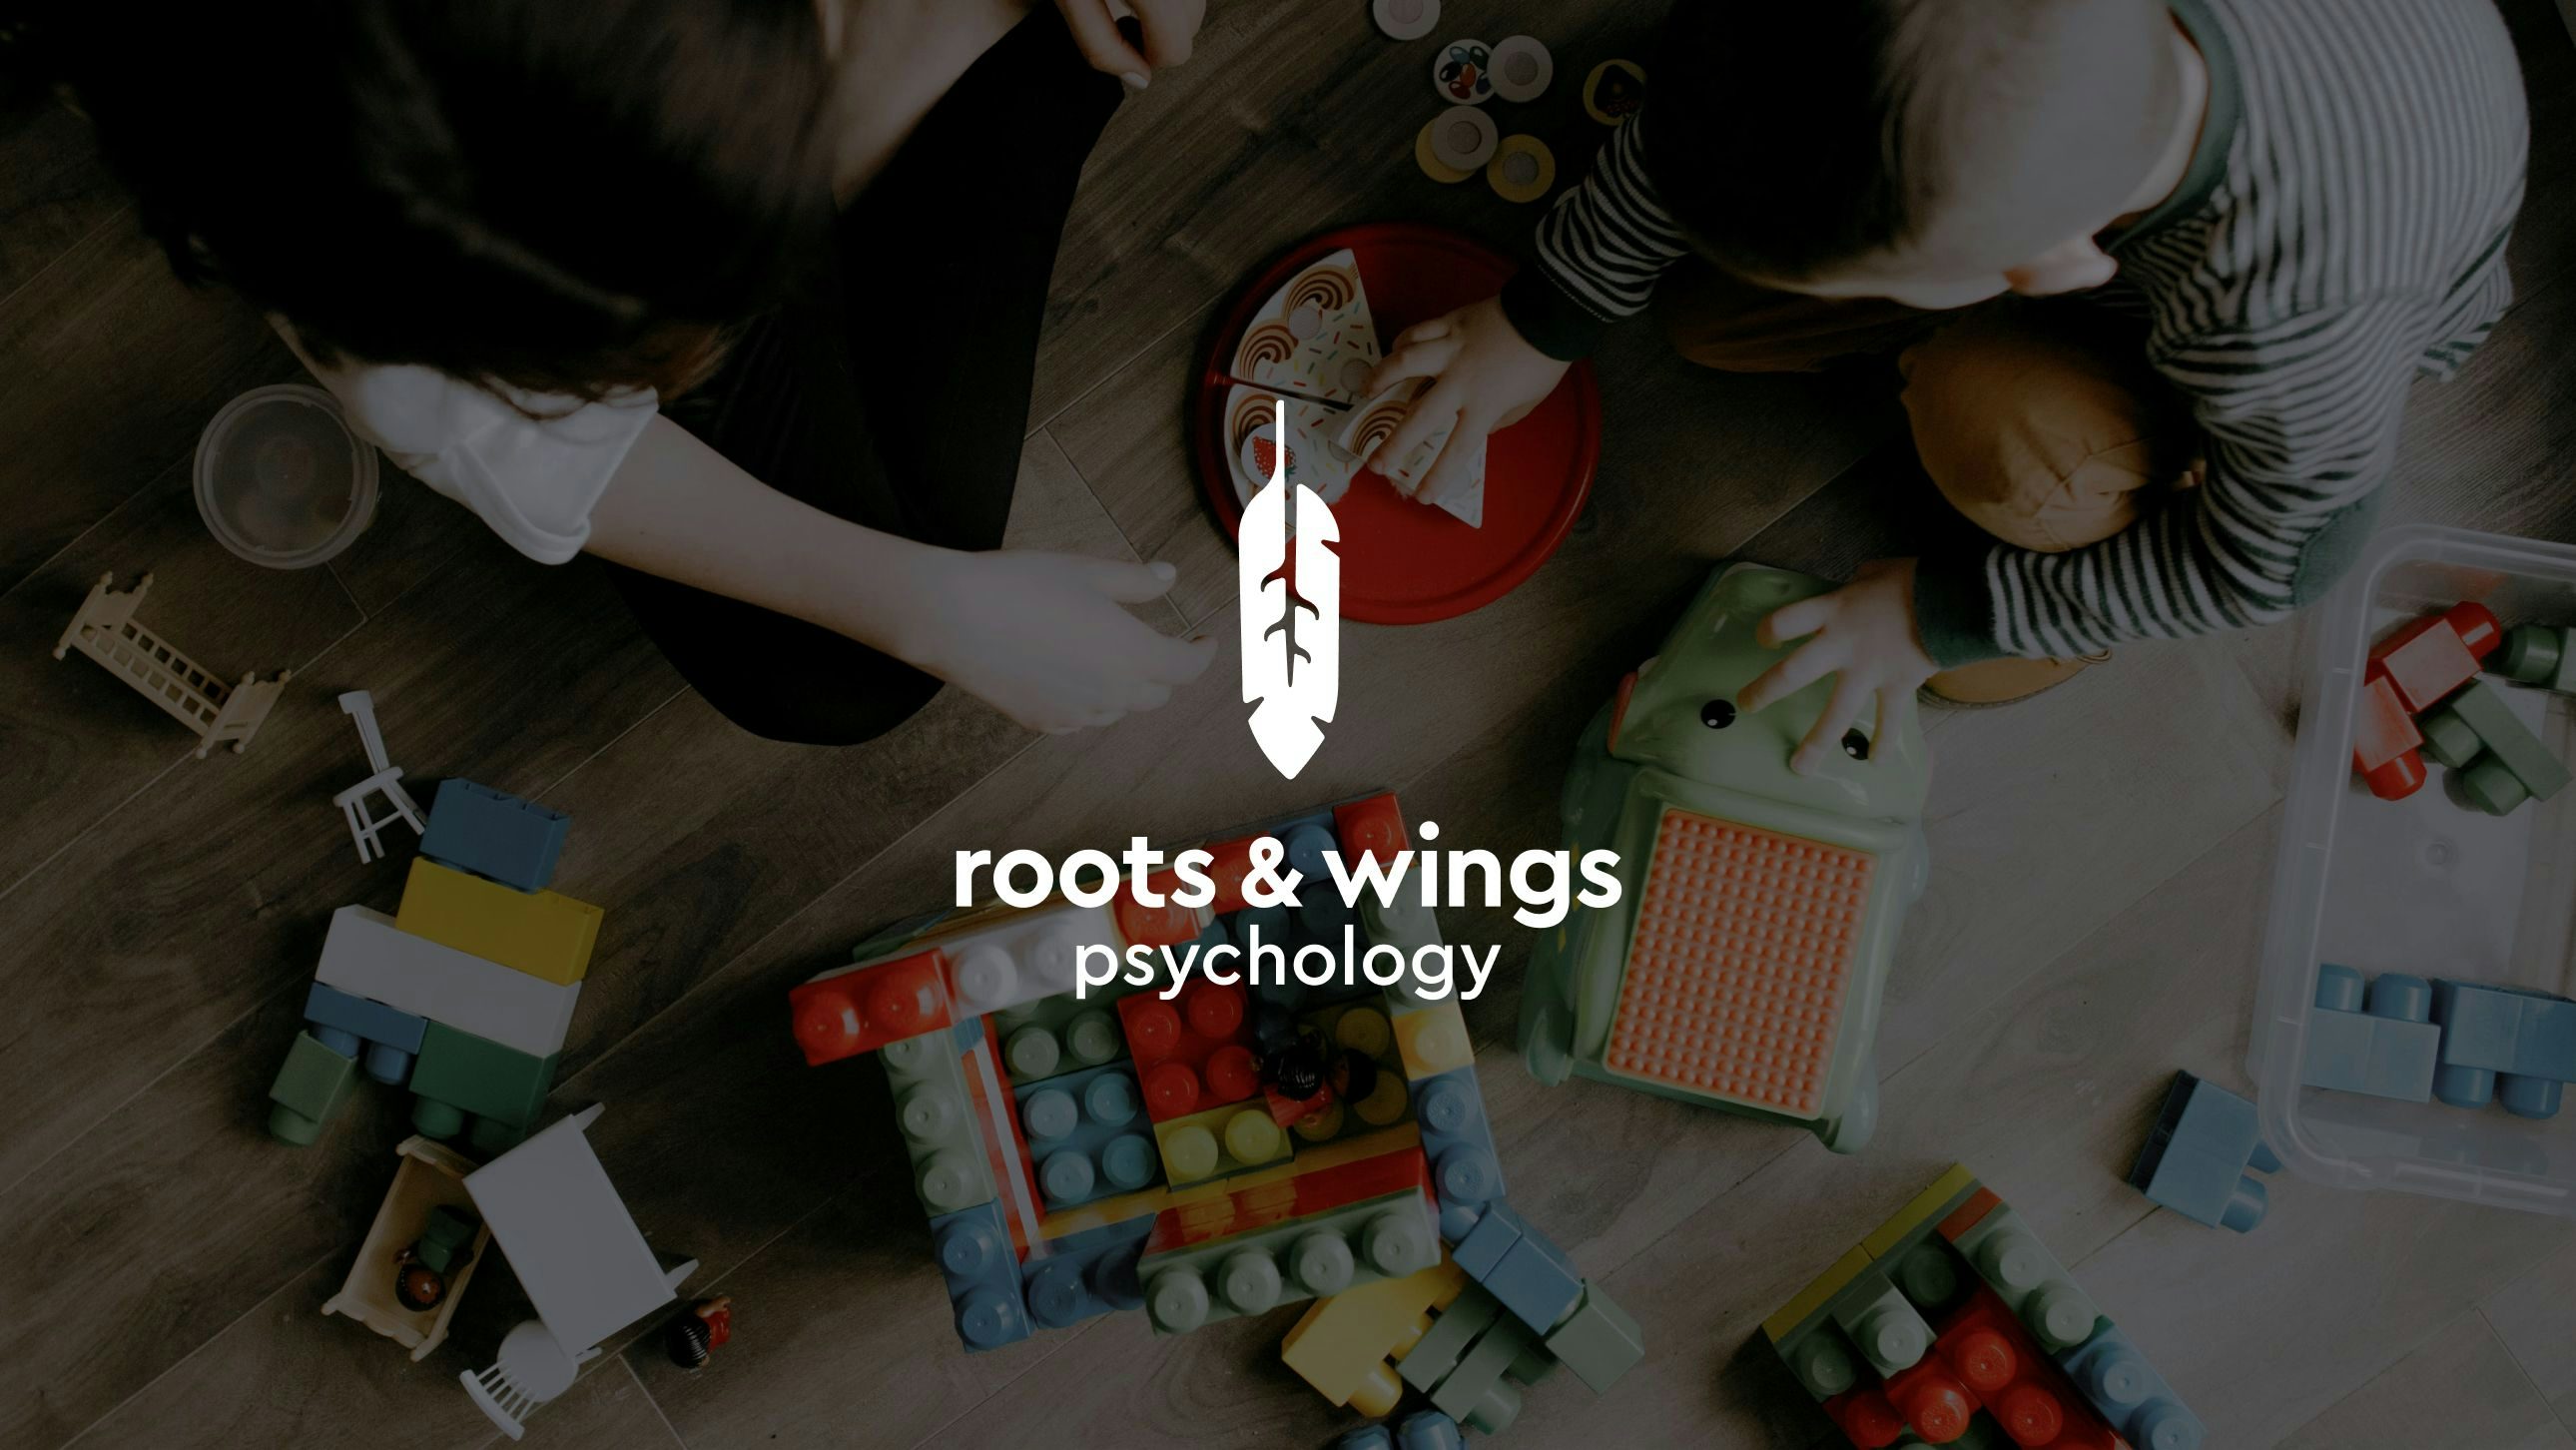 Roots & Wings Psychology